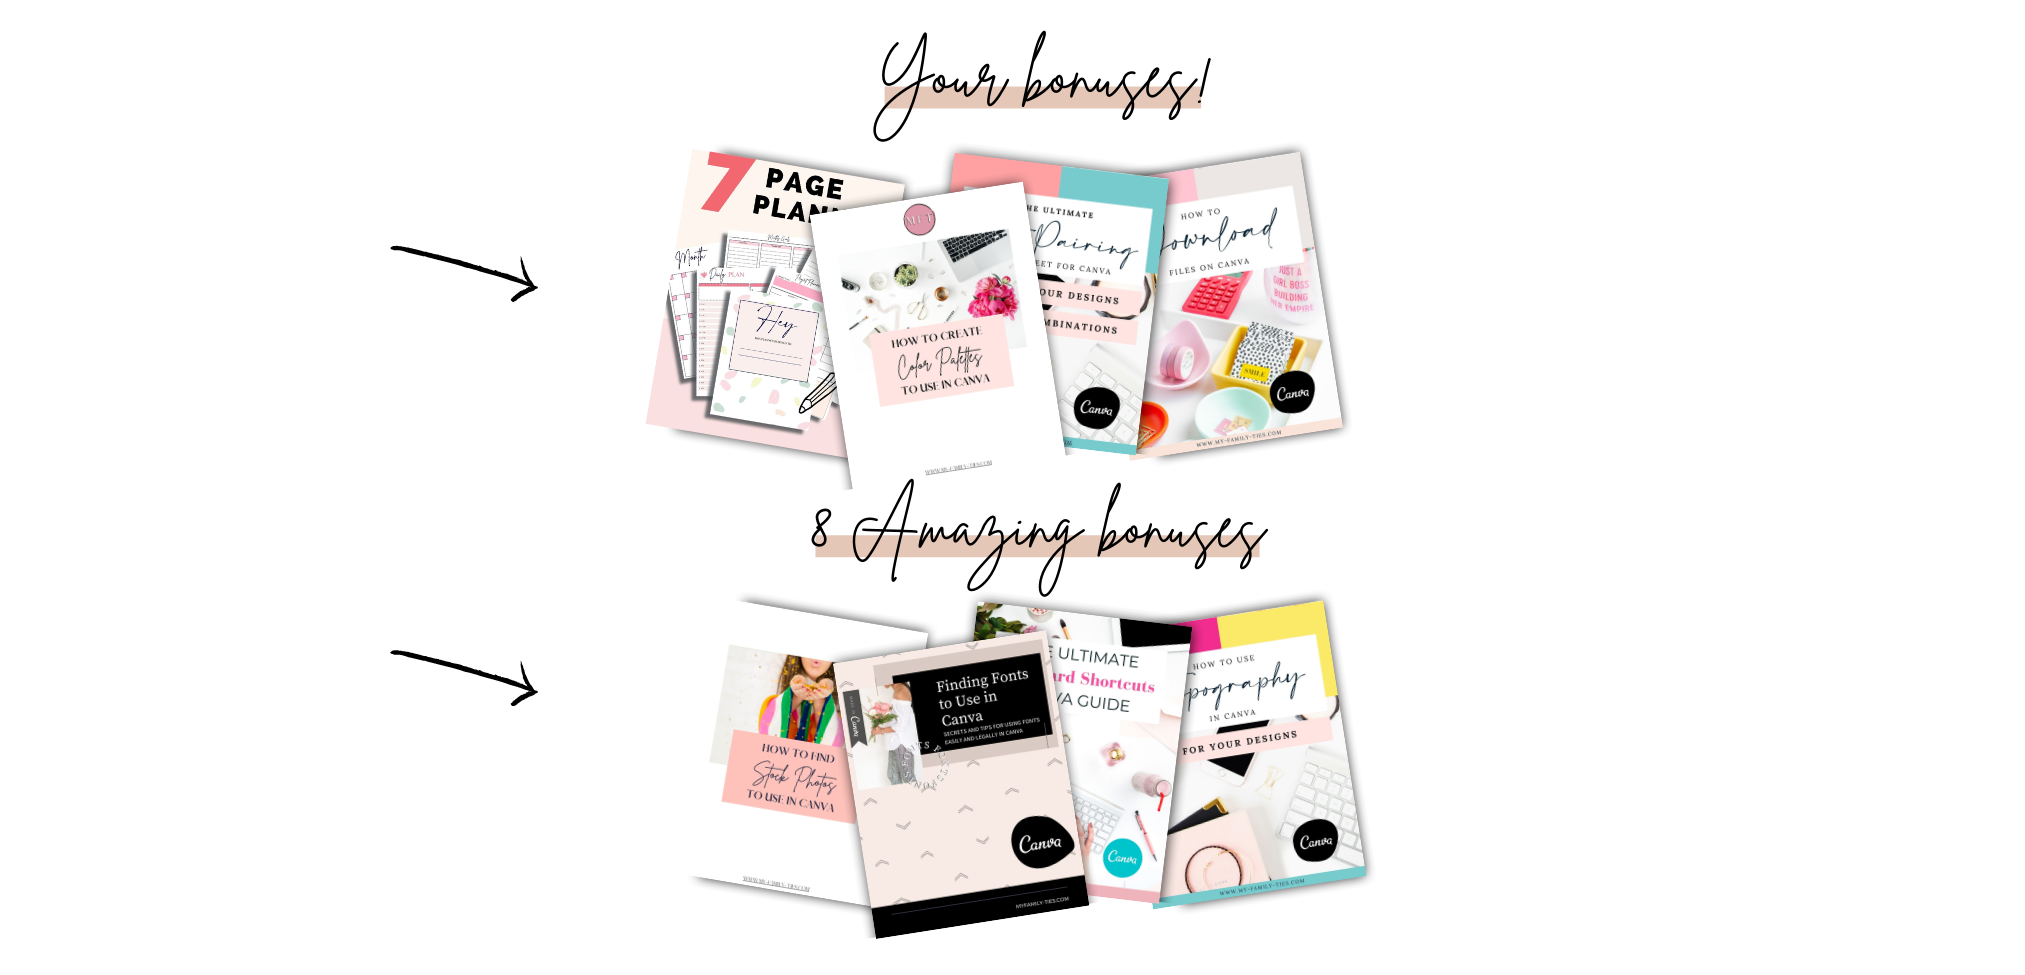 Canva essentials online course the step-by-step program to guide you through all the essentials you need even with zero design skills